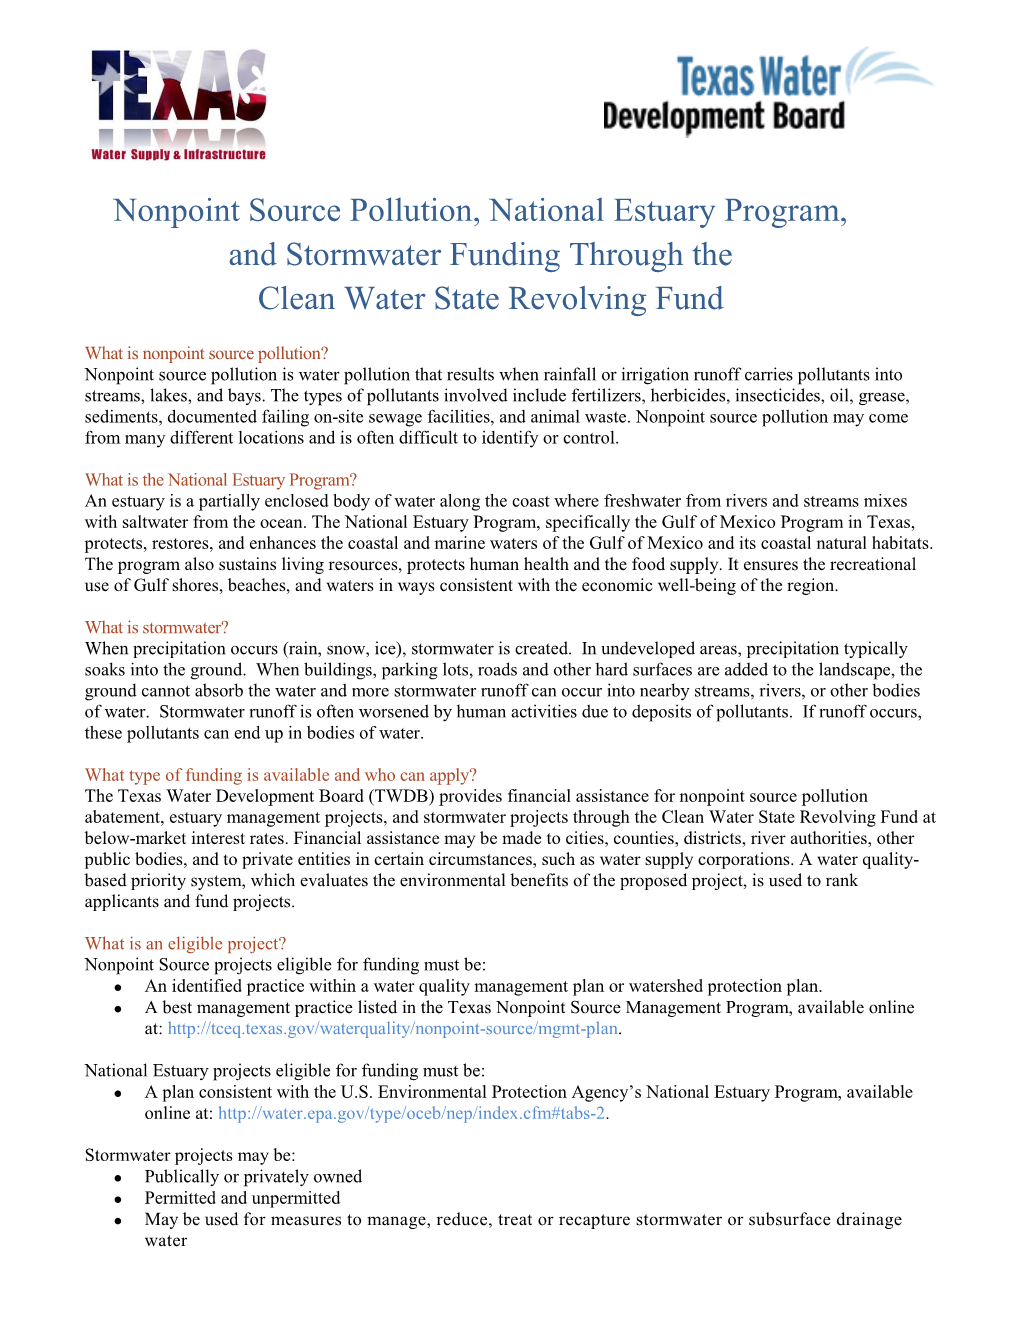 Nonpoint Source Pollution, National Estuary Program, and Stormwater Funding Through the Clean Water State Revolving Fund